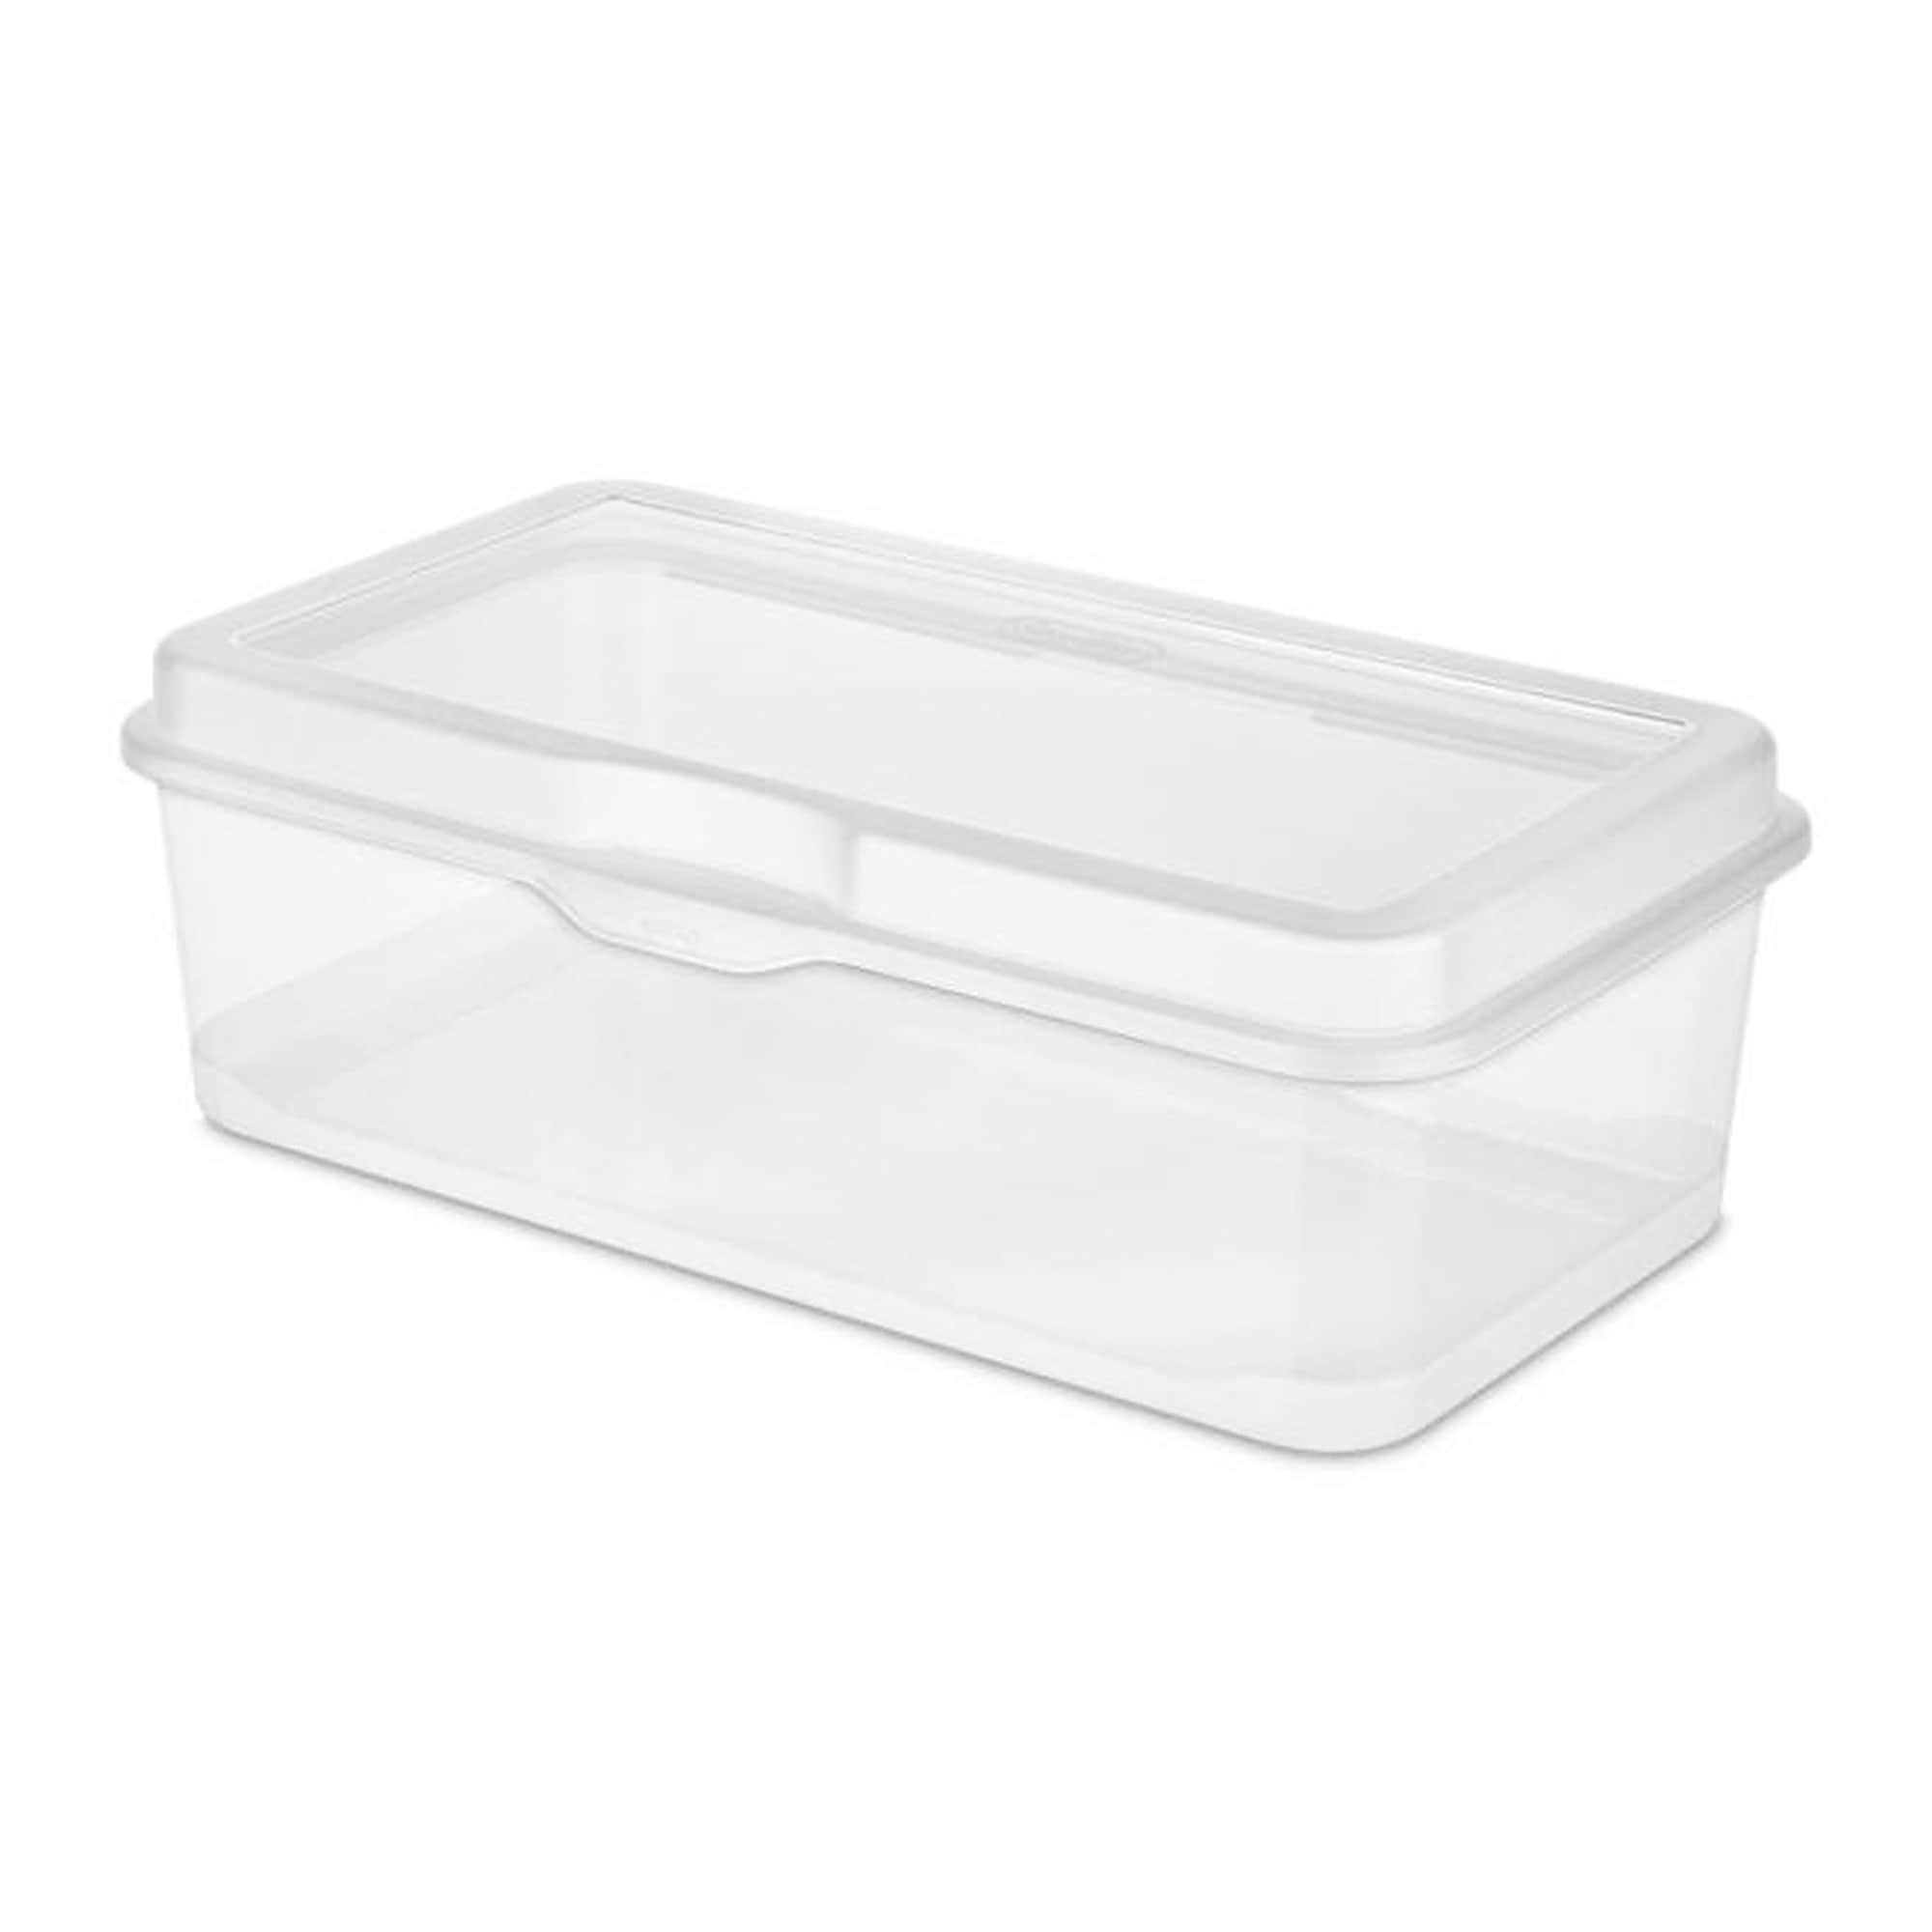 Sterilite 60 qt. Clearview Latch Lid Wheeled Underbed Storage Box (8-Pack)